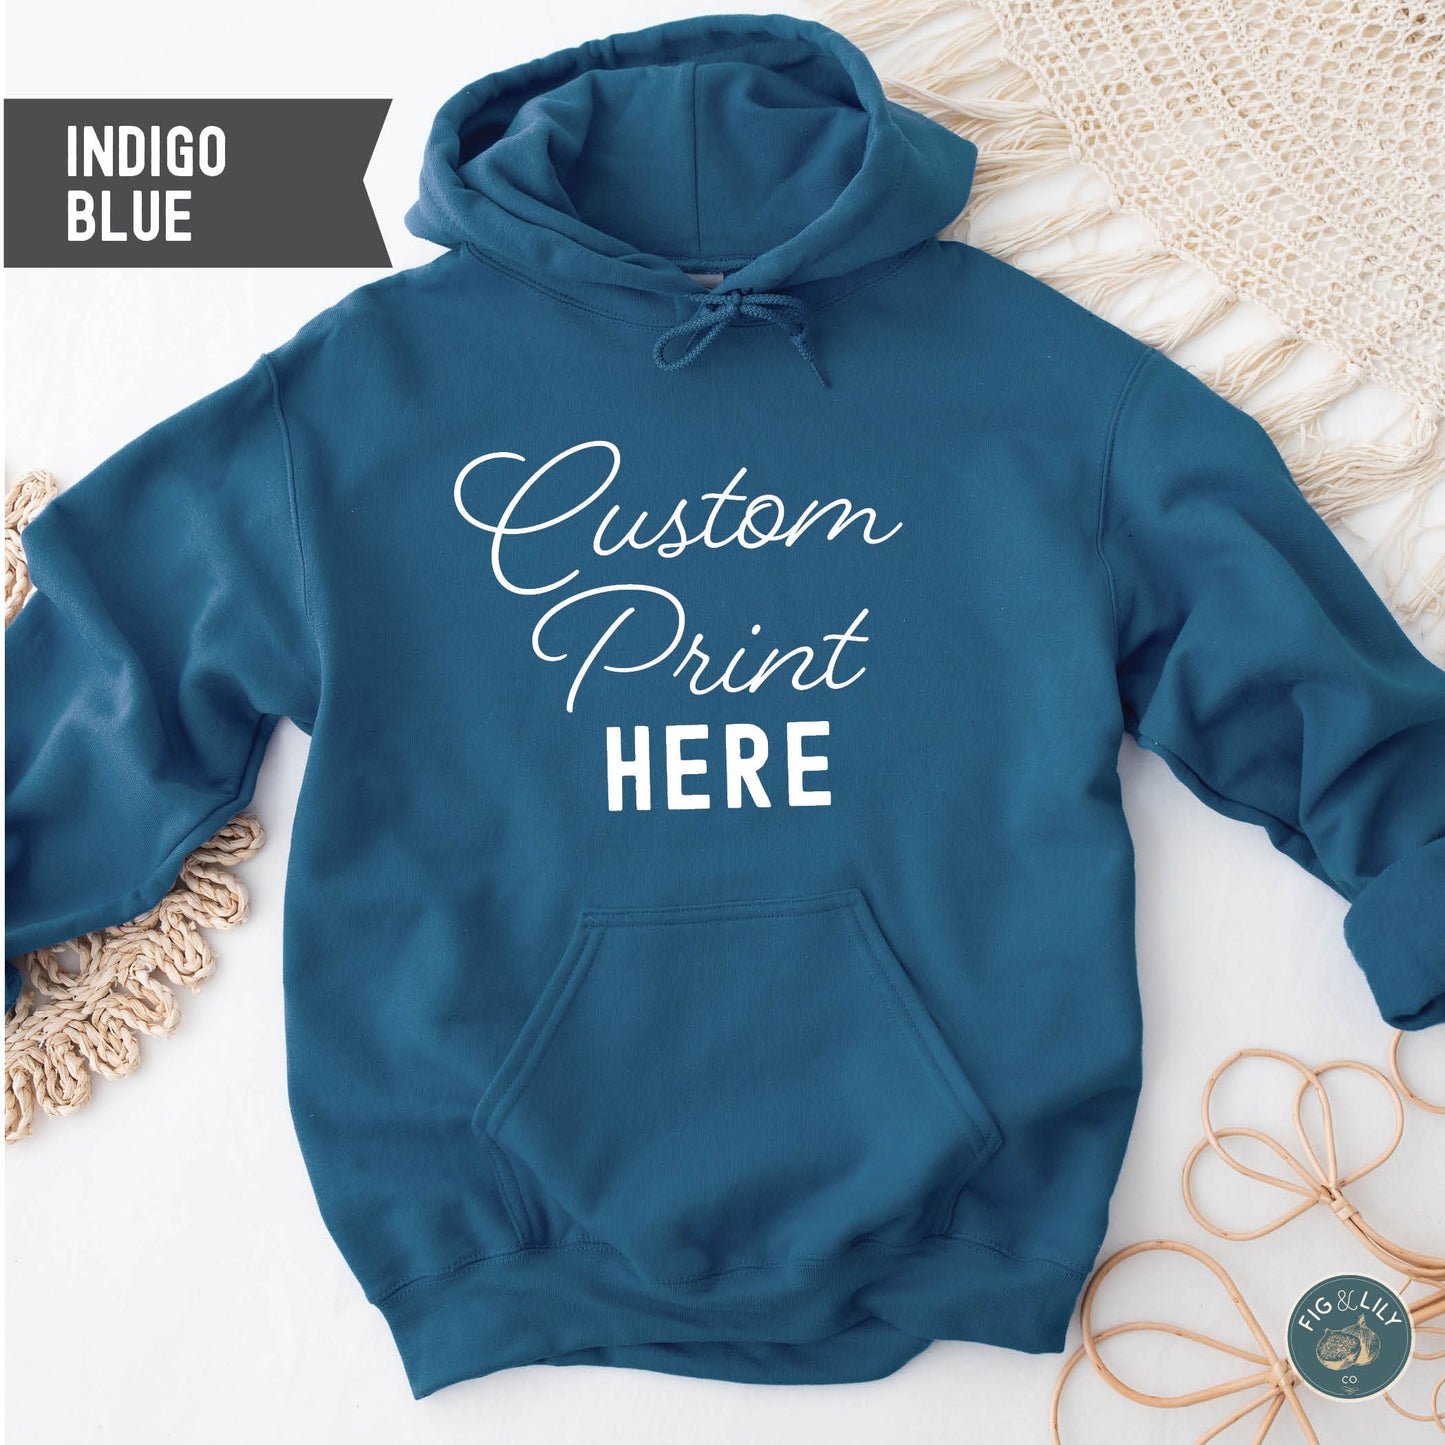 Indigo Blue Unisex Hoodie, Custom Printed sweatshirt Design, Your Design Here, Personalized Design created just for you, digital proof approval included